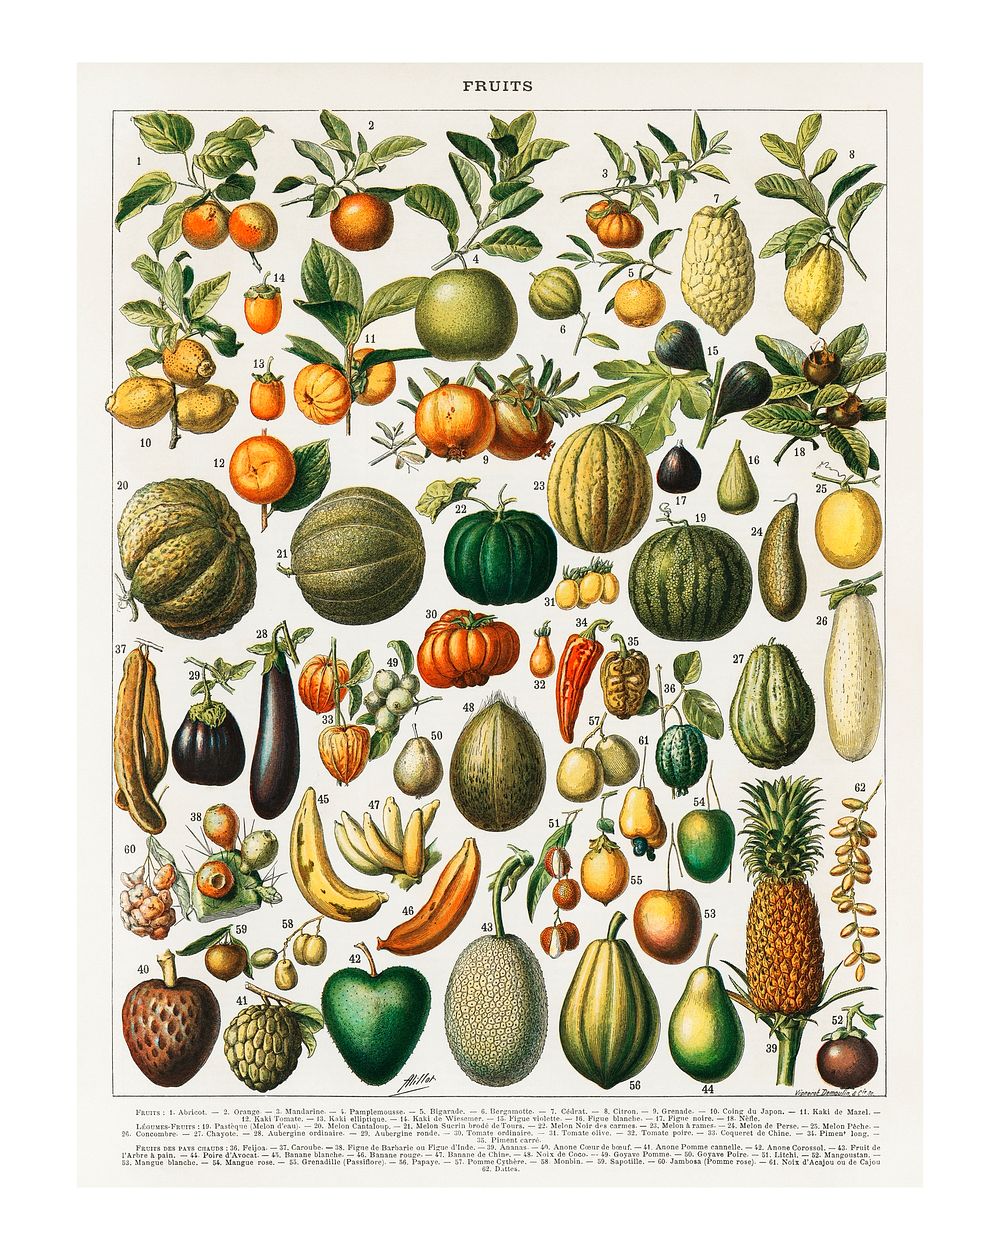 Variety of fruits and vegetables vintage illustration wall art print and poster design remix from original artwork.